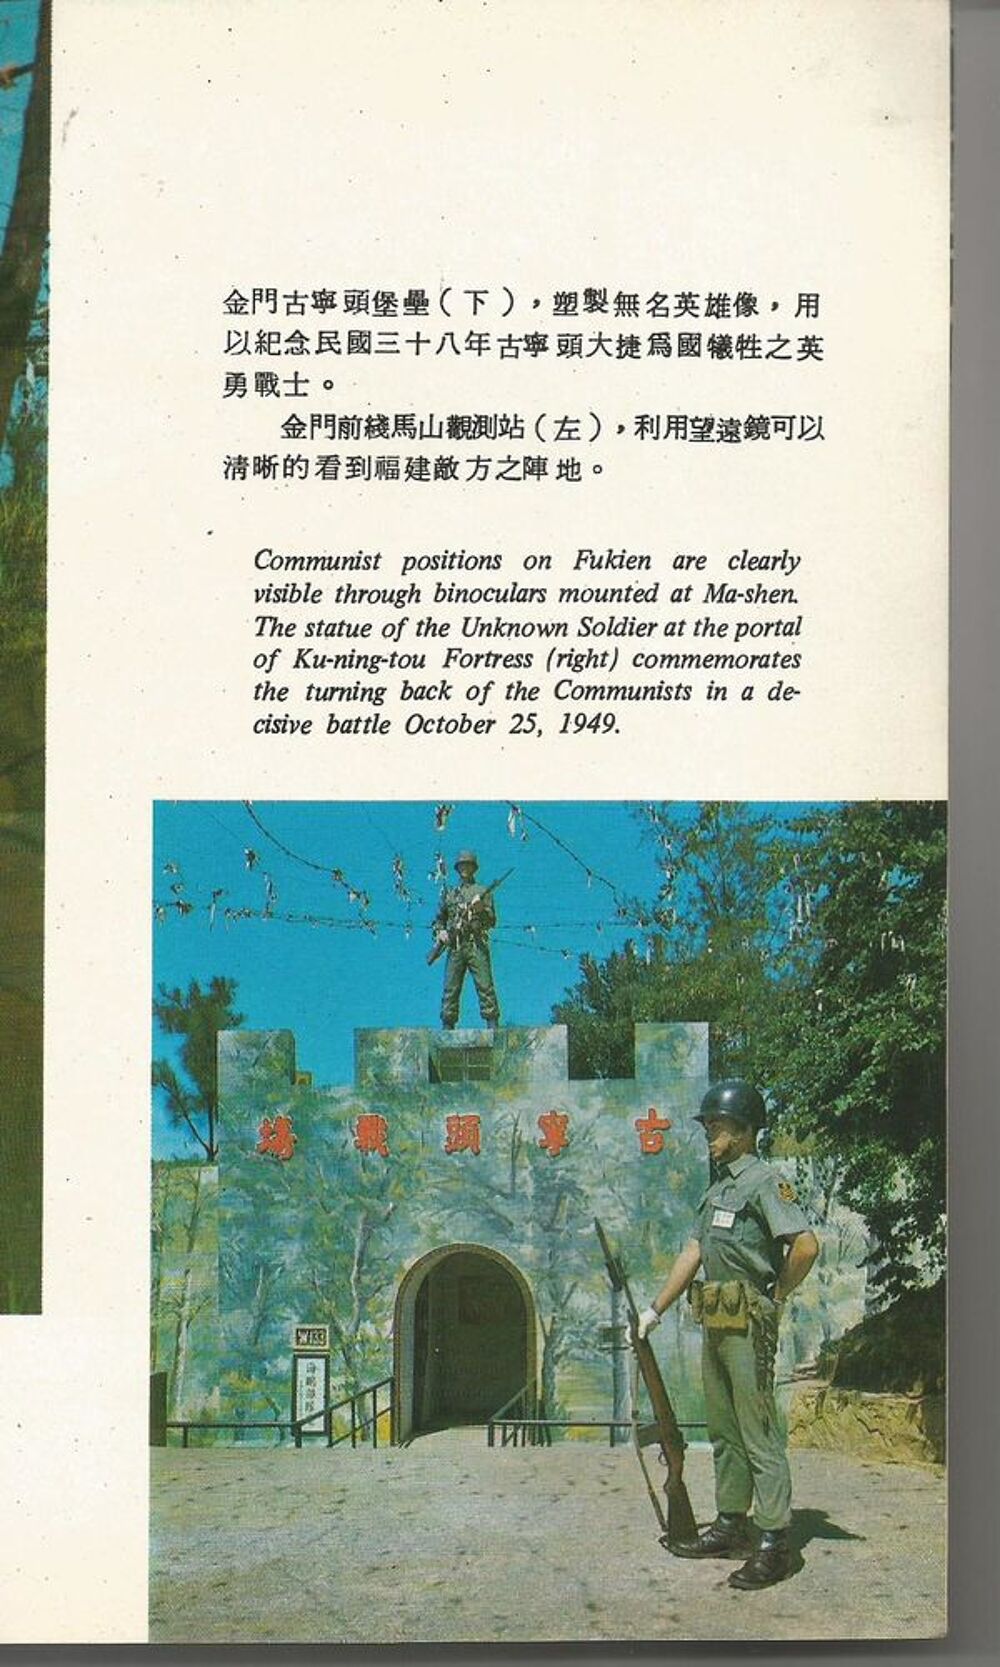 REPUBLIC OF CHINA IN 1975-76 Anglais et chinois Livres et BD